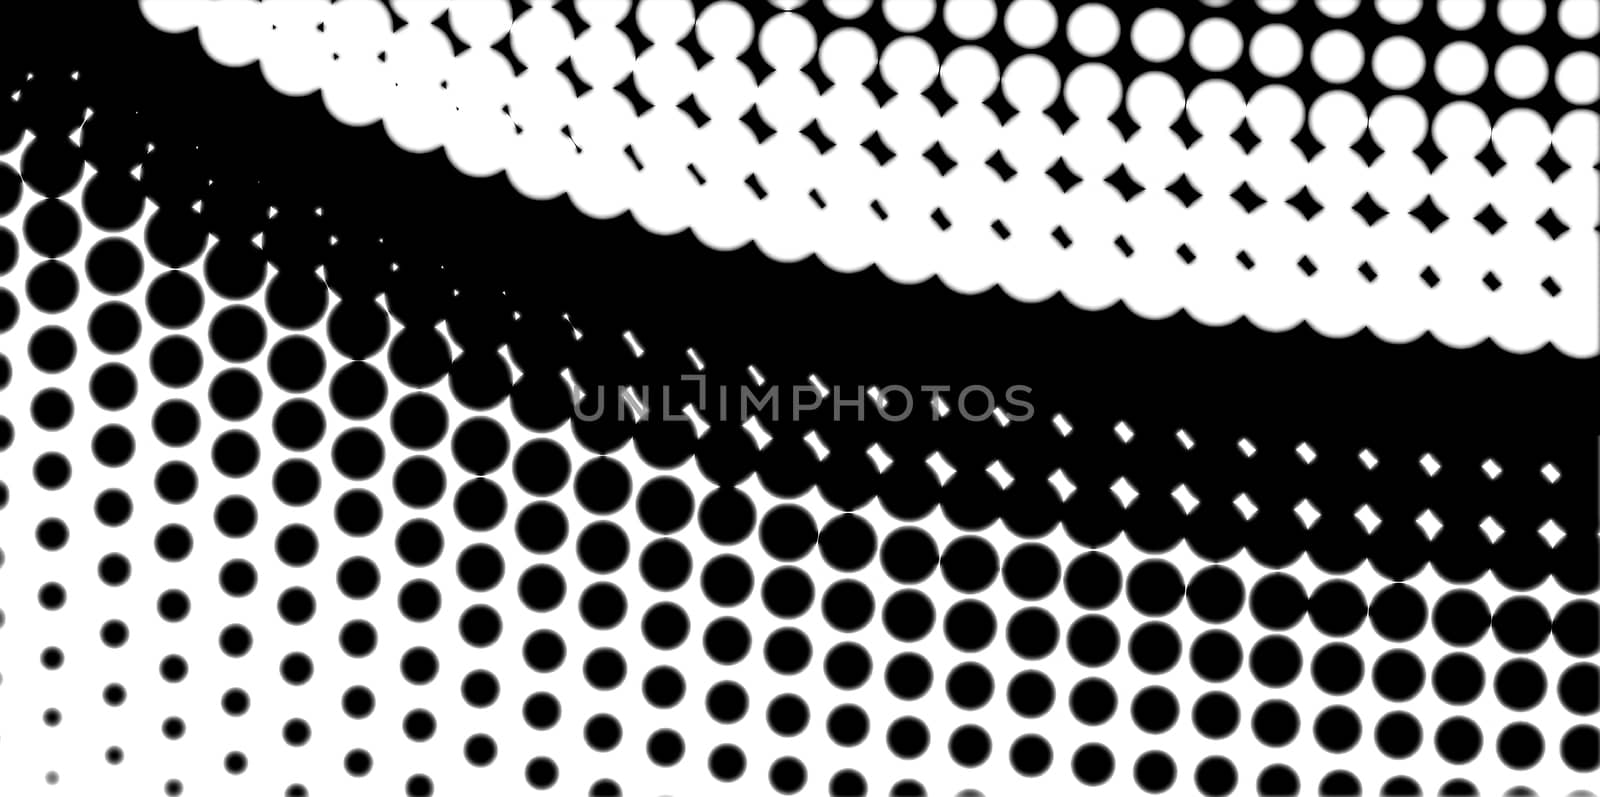 A half tone image with white dots set against a black background and black dots against a white background.